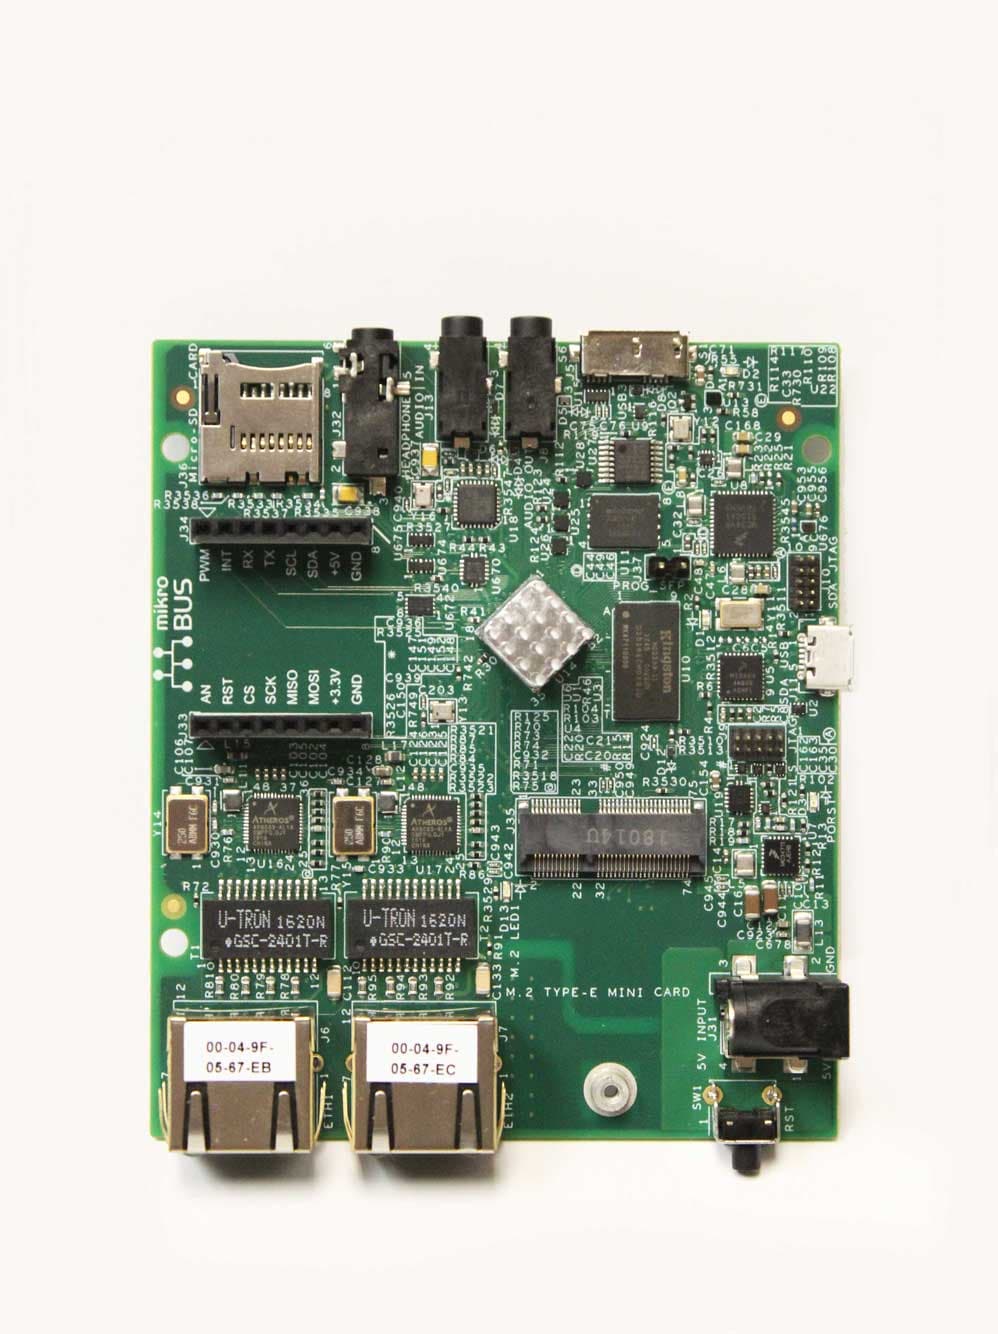 FRWY-LS1012A Board Image Front